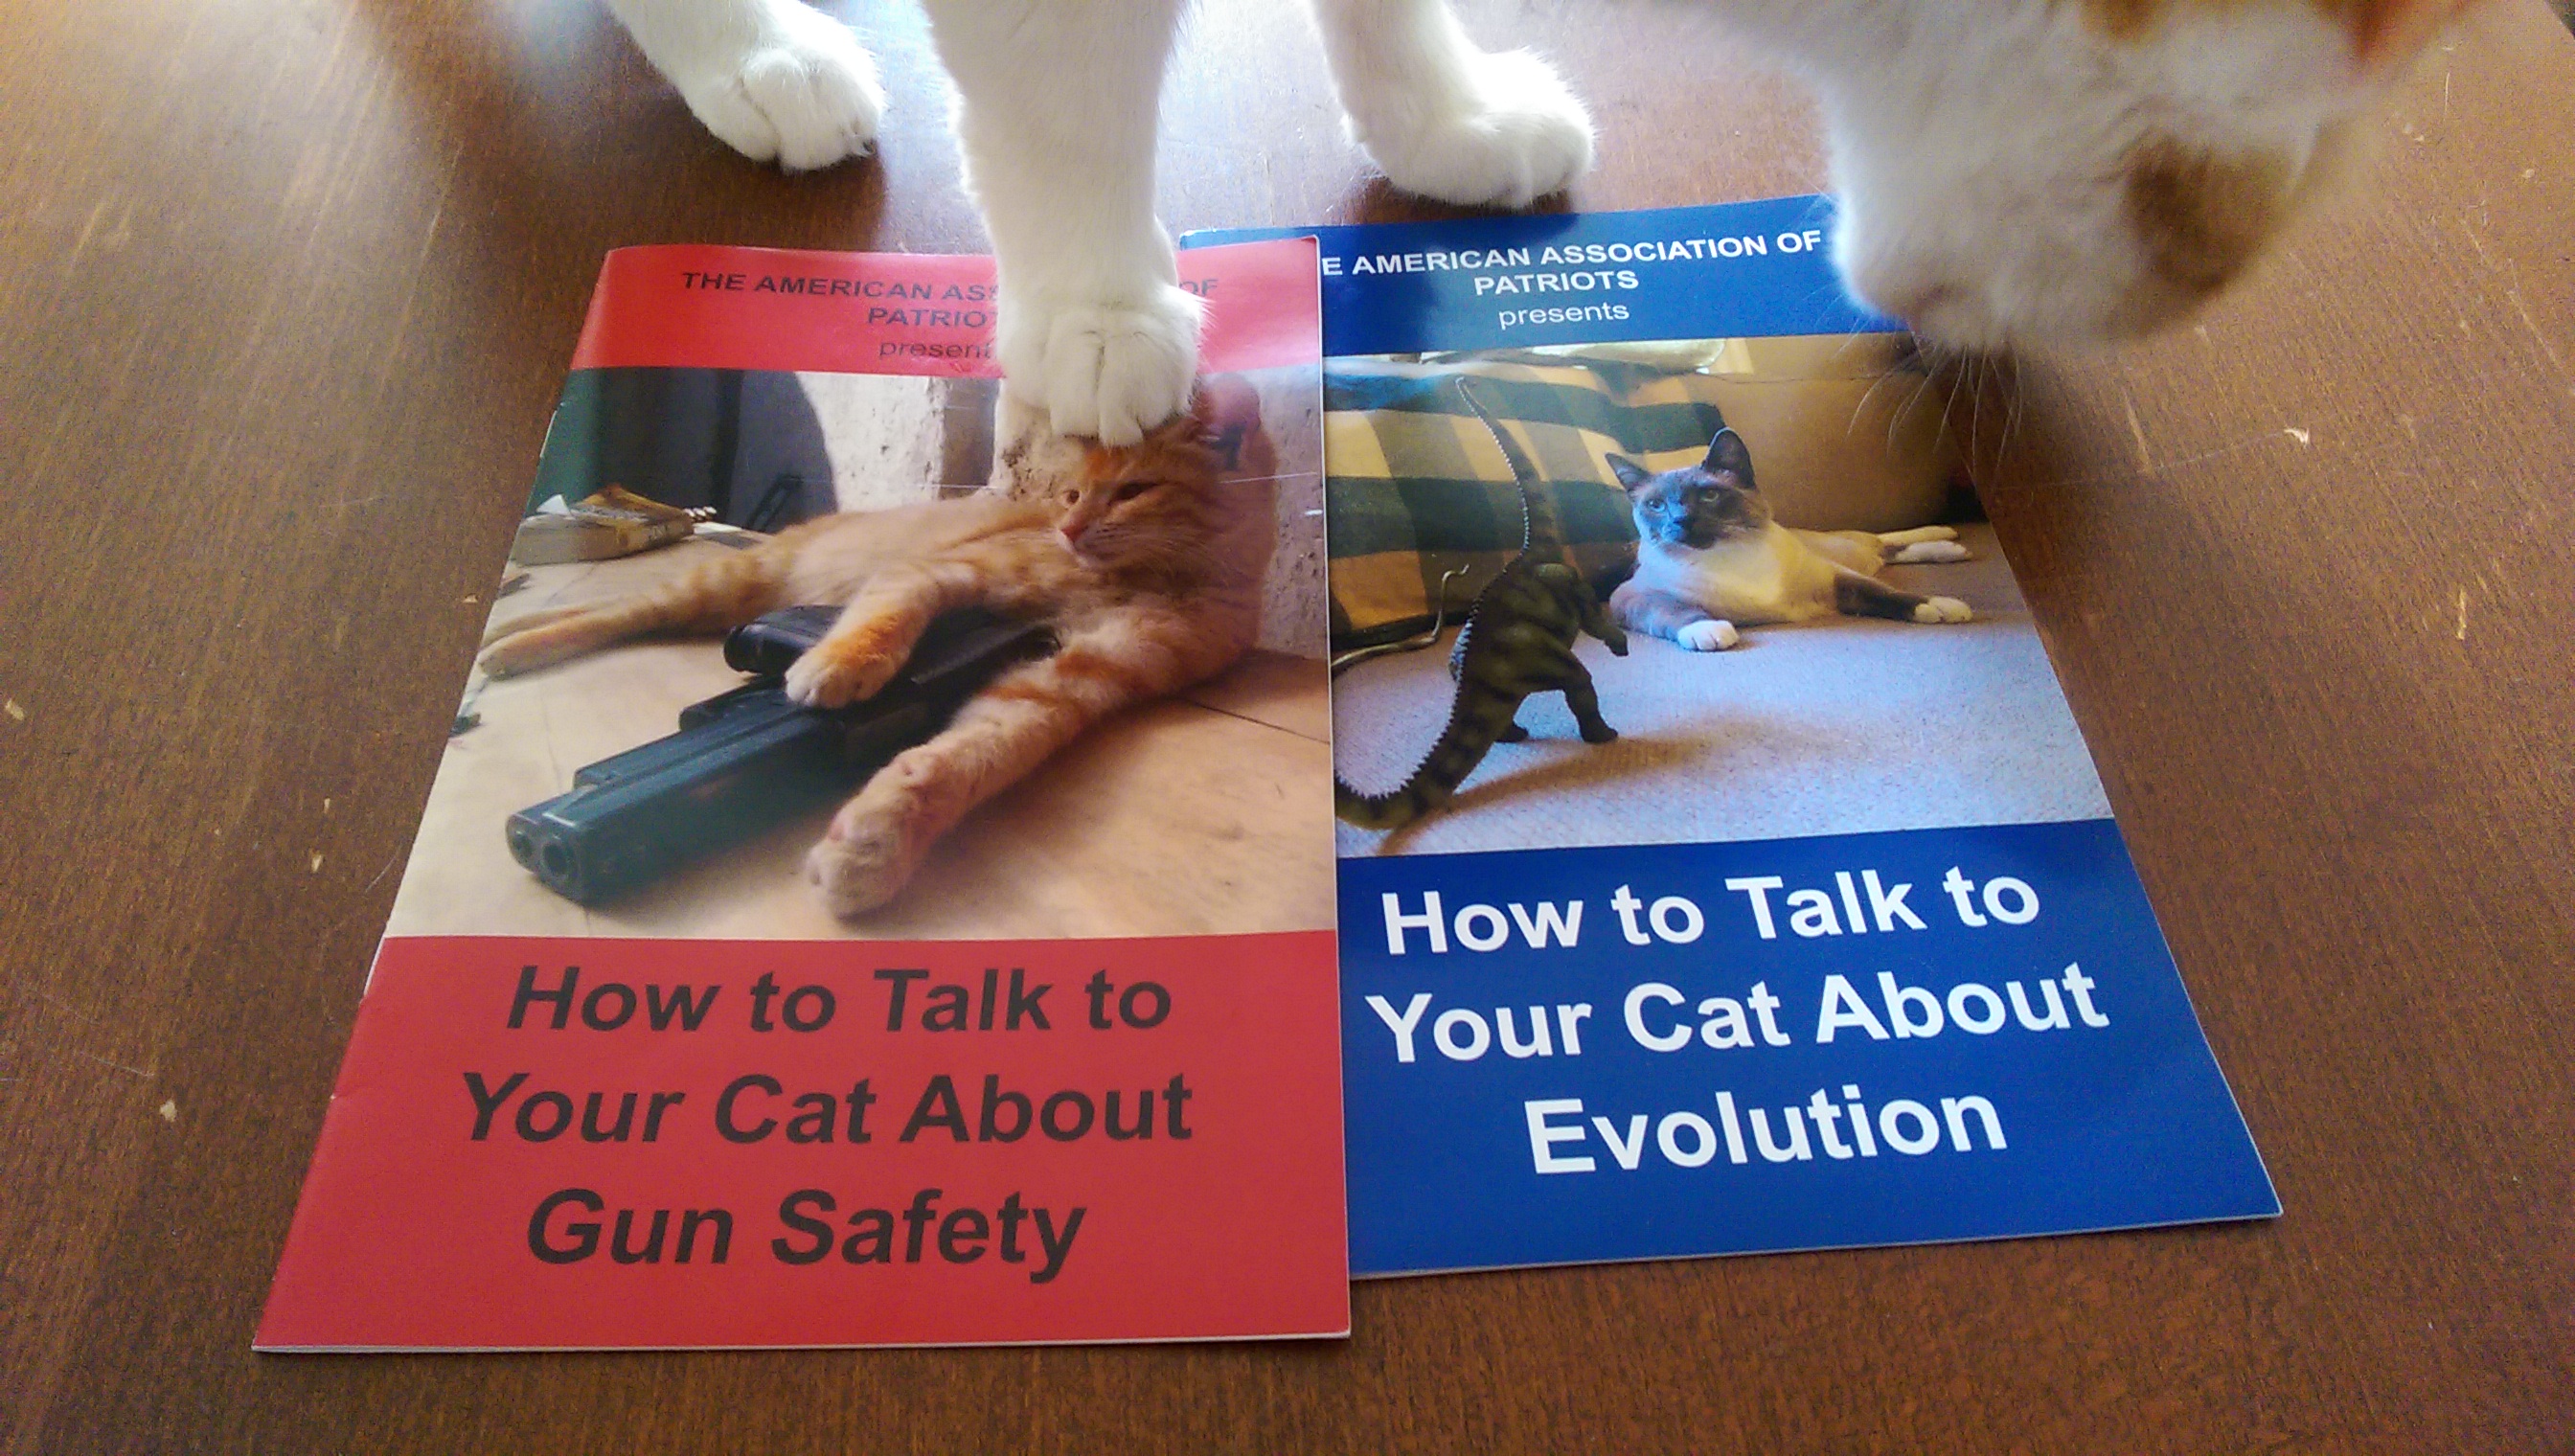 How to Talk to Your Cats About Gun Safety and Evolution